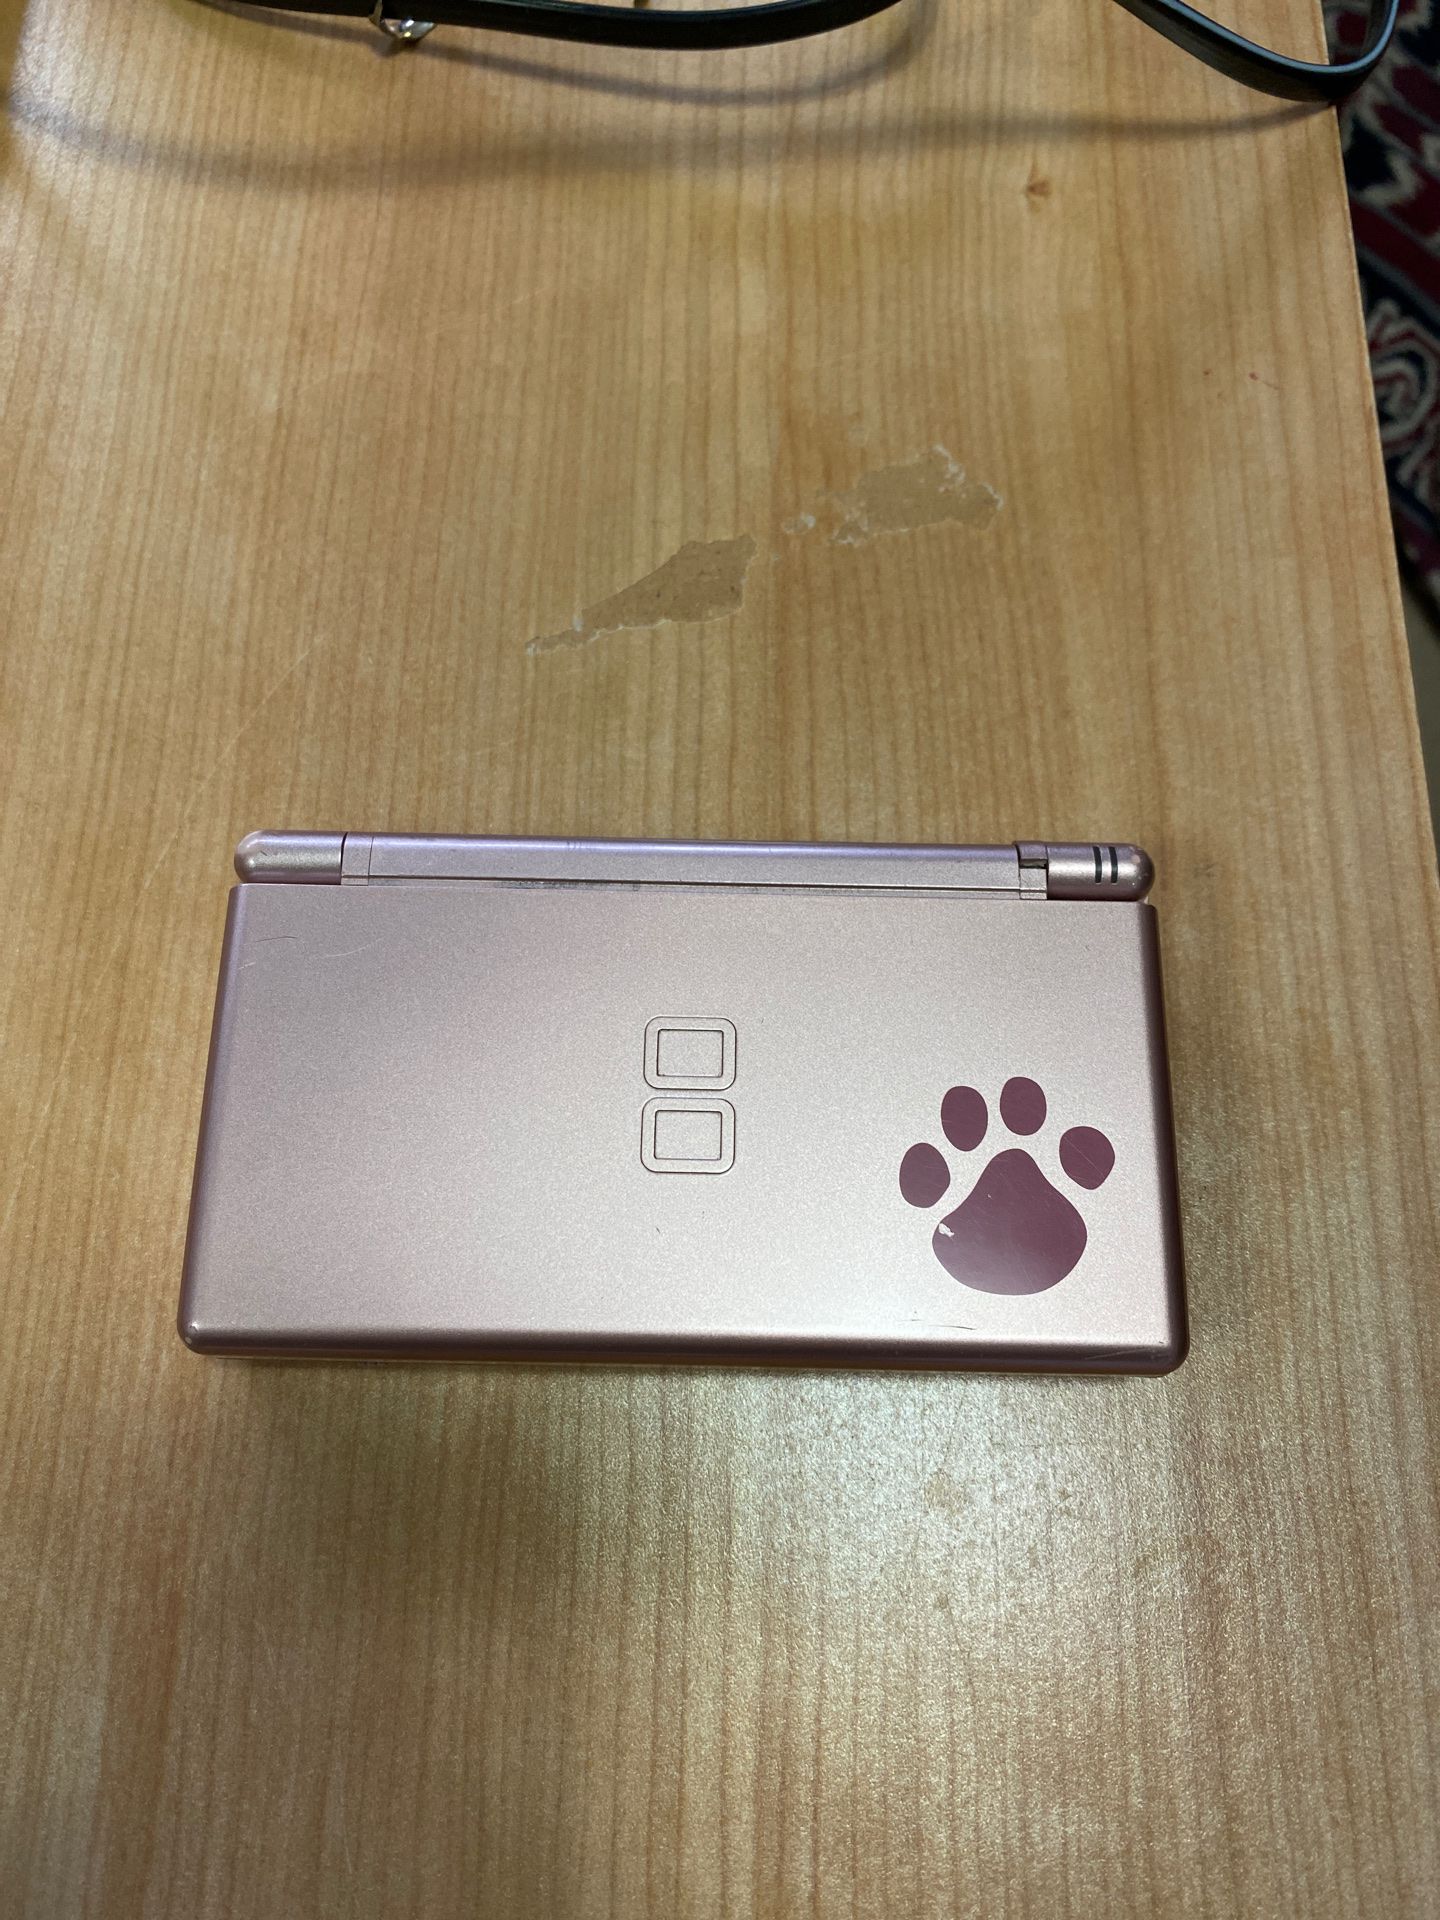 NINTENDO DS LITE NINTENDOGS EDITION WITH UNIQUE PINK METALLIC COLOR AND PAWPRINT